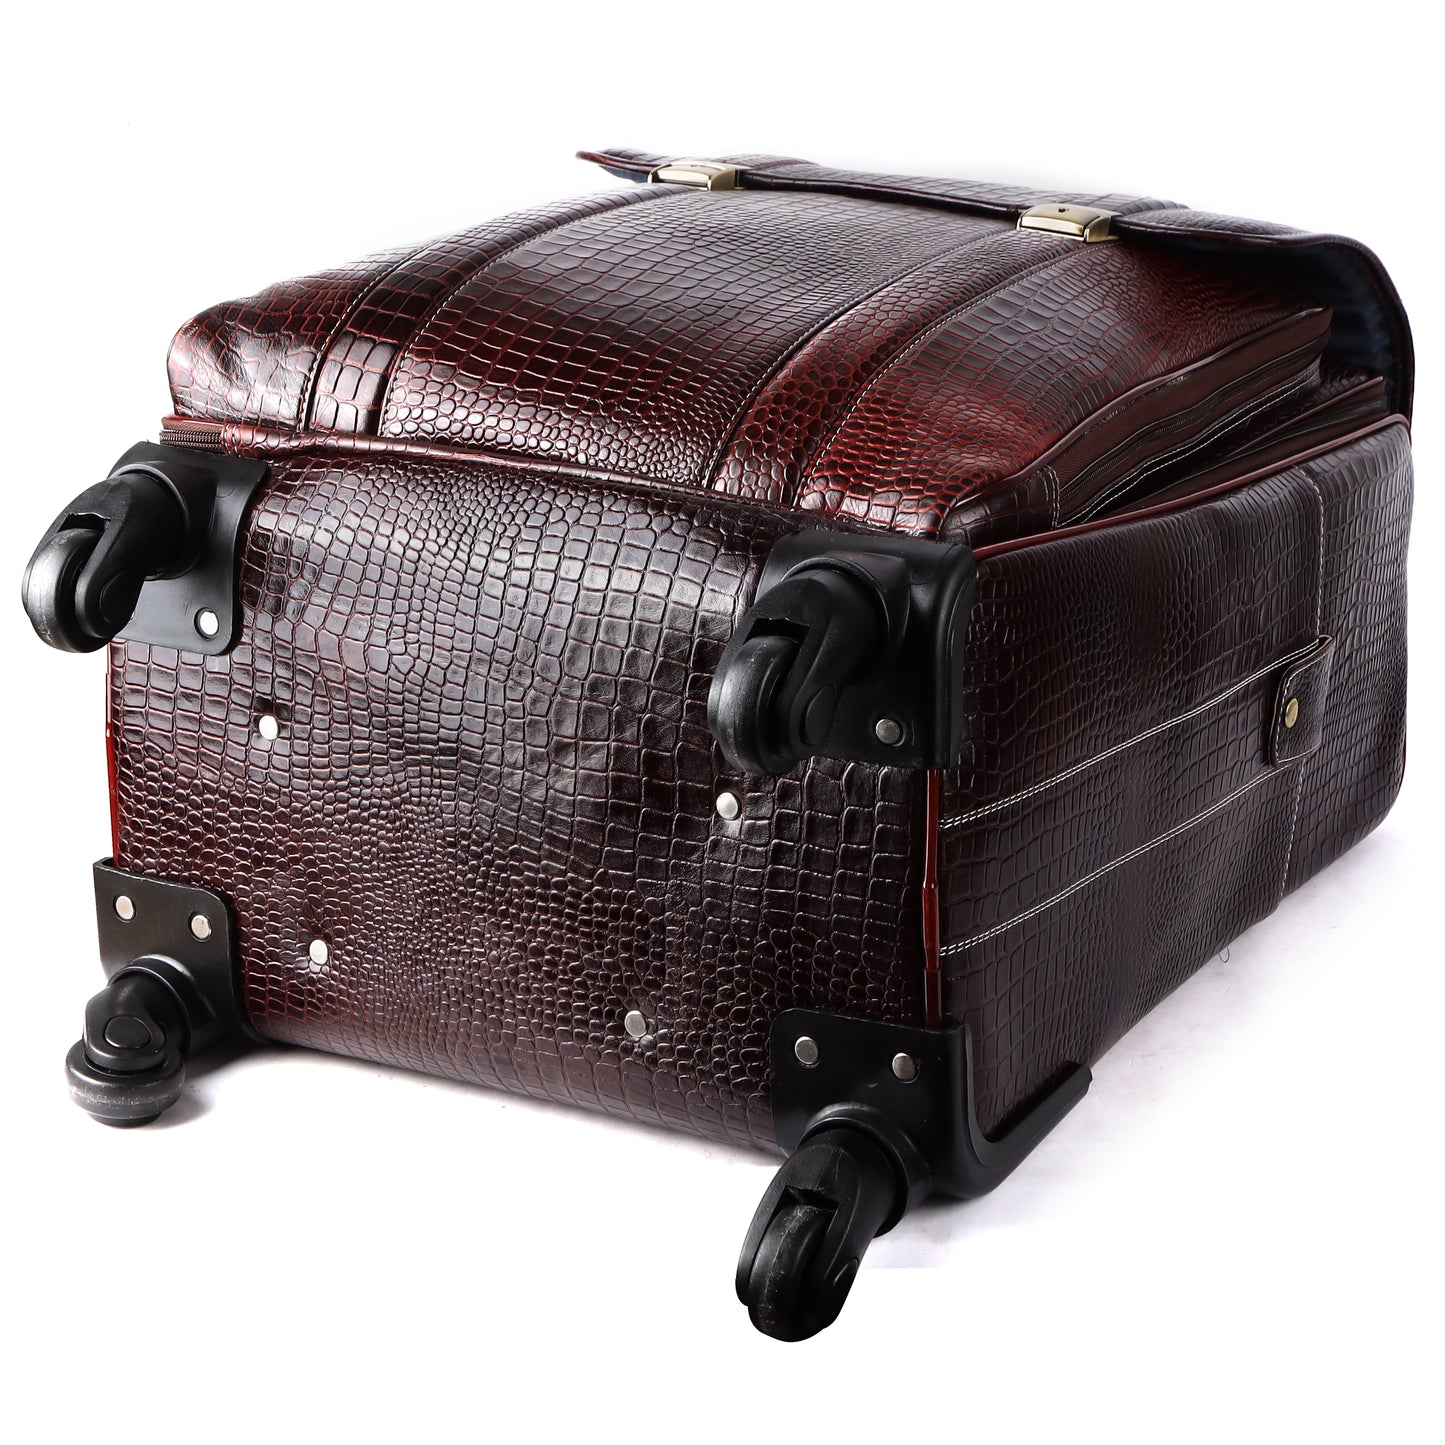 Brown Leather Trolley Bag for Flight Leather Weekender Leather Luggage with Wheels